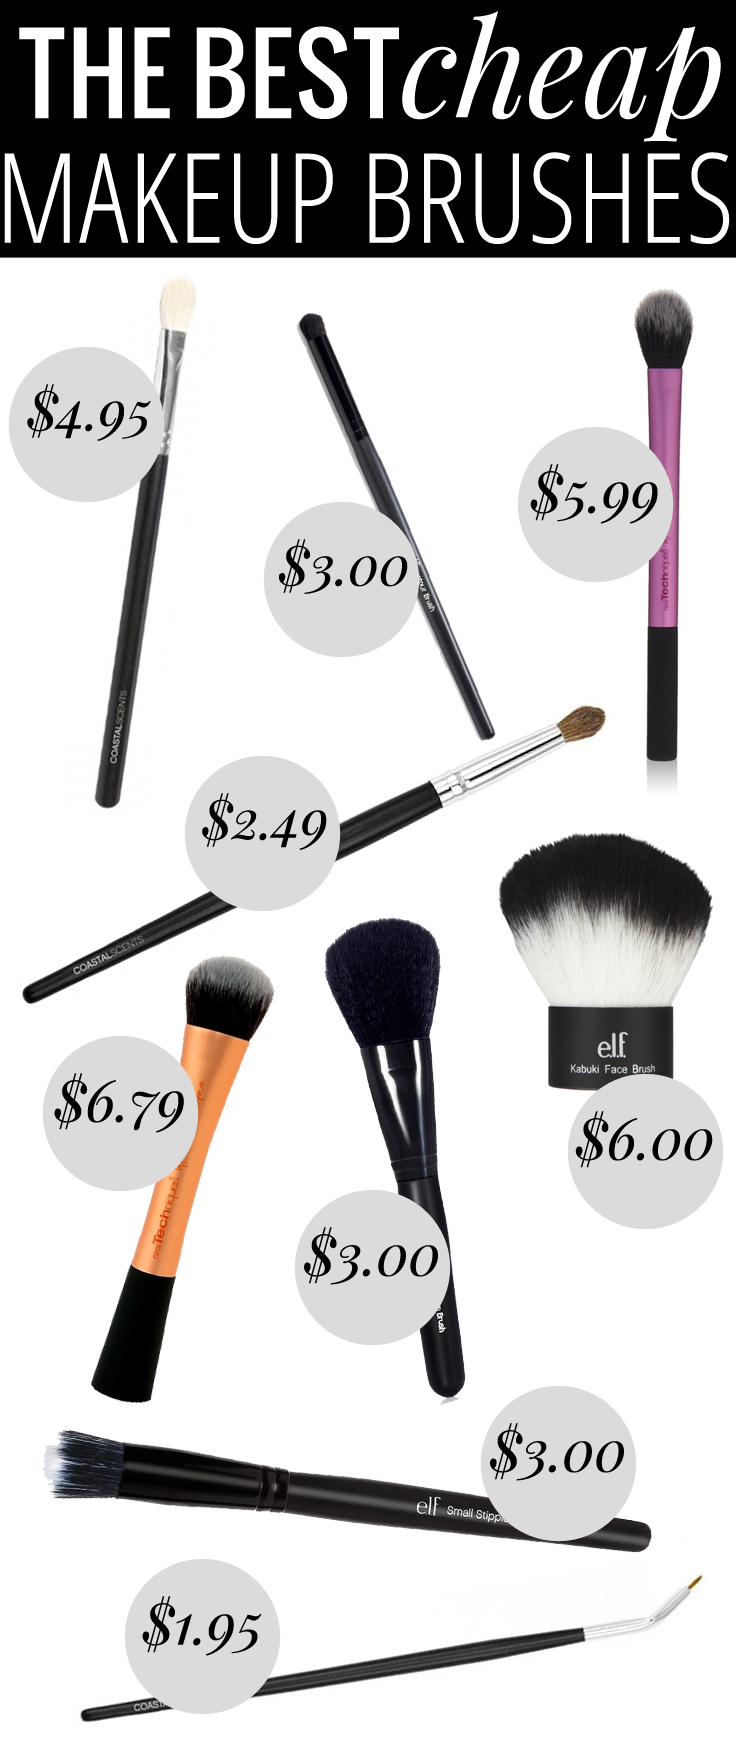 The Best Cheap Makeup Brushes – every brush you’ll need, all for under $10 (and most under $5)!